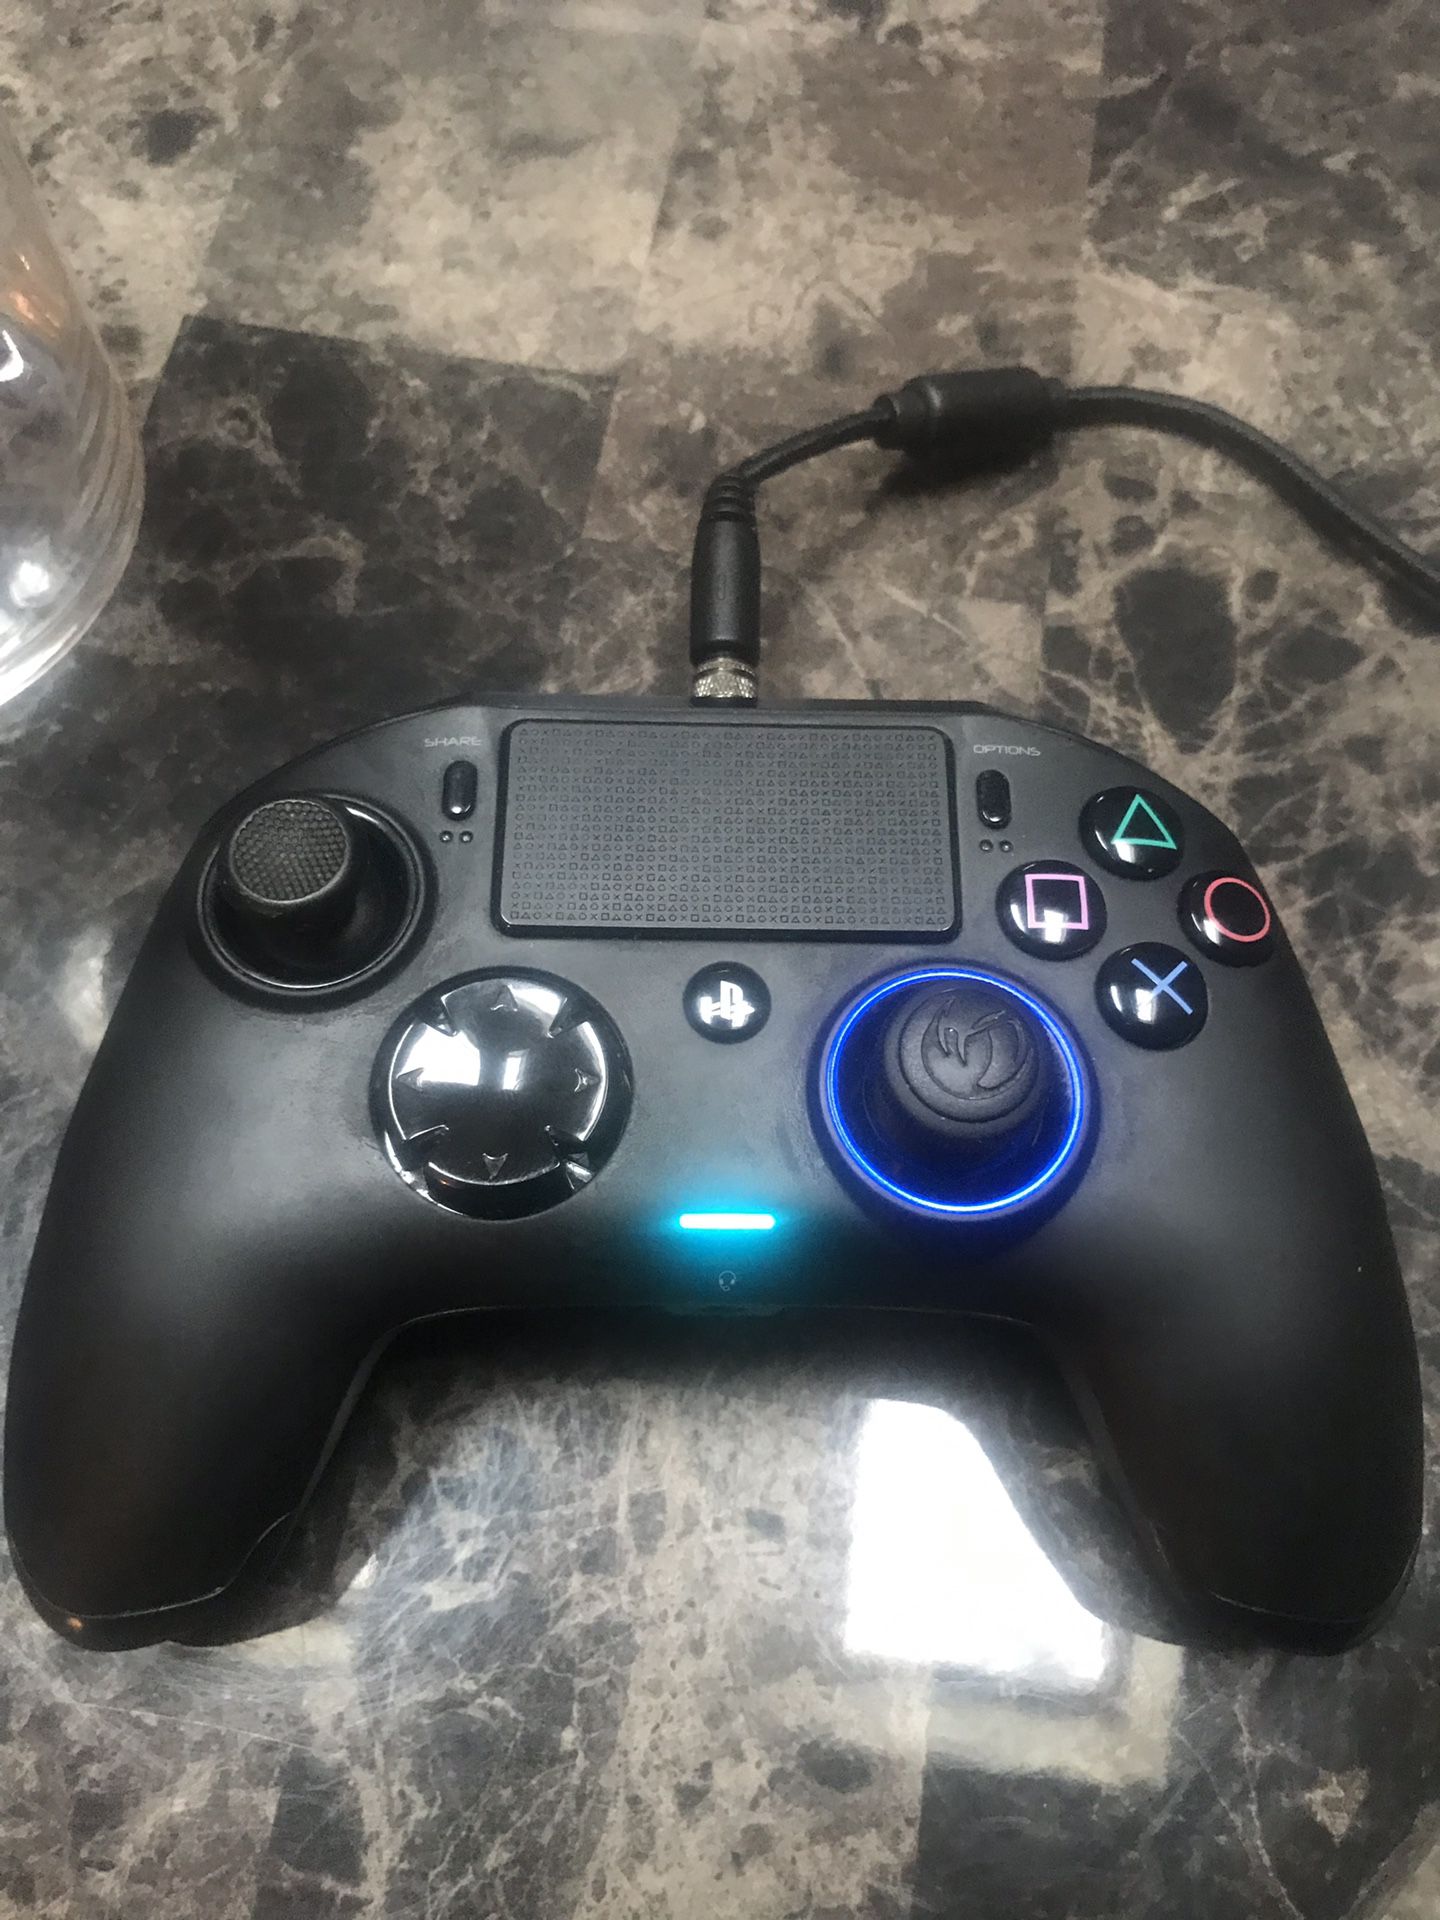 Ps4 pro controller wired for sale or trade